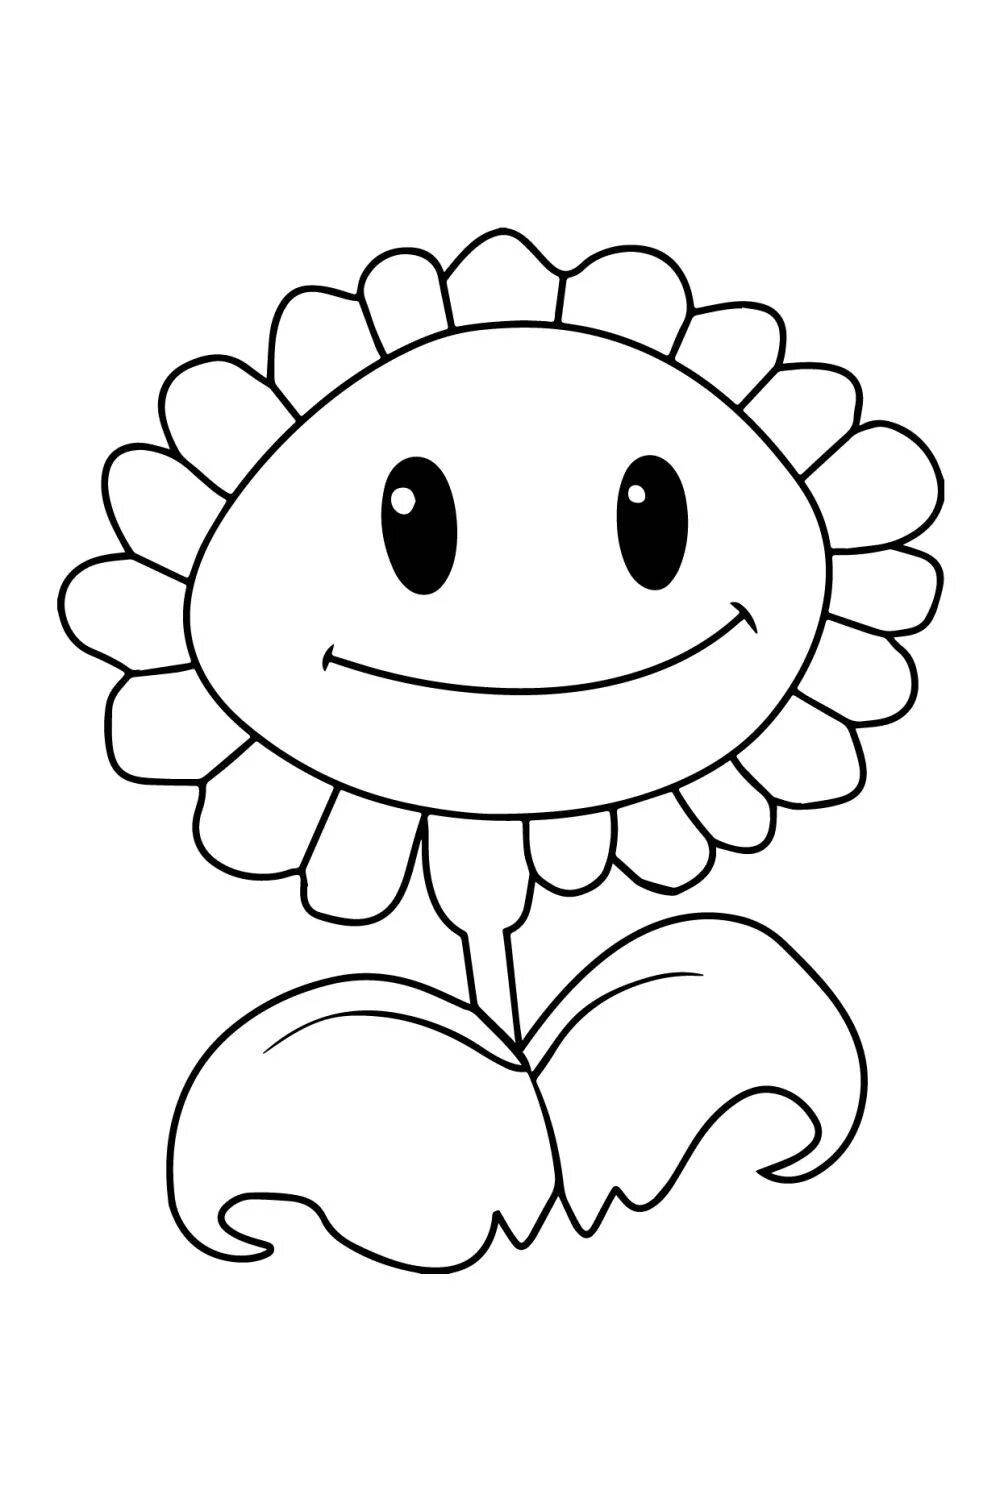 Amazing Plants Vs Zombies Coloring Pages